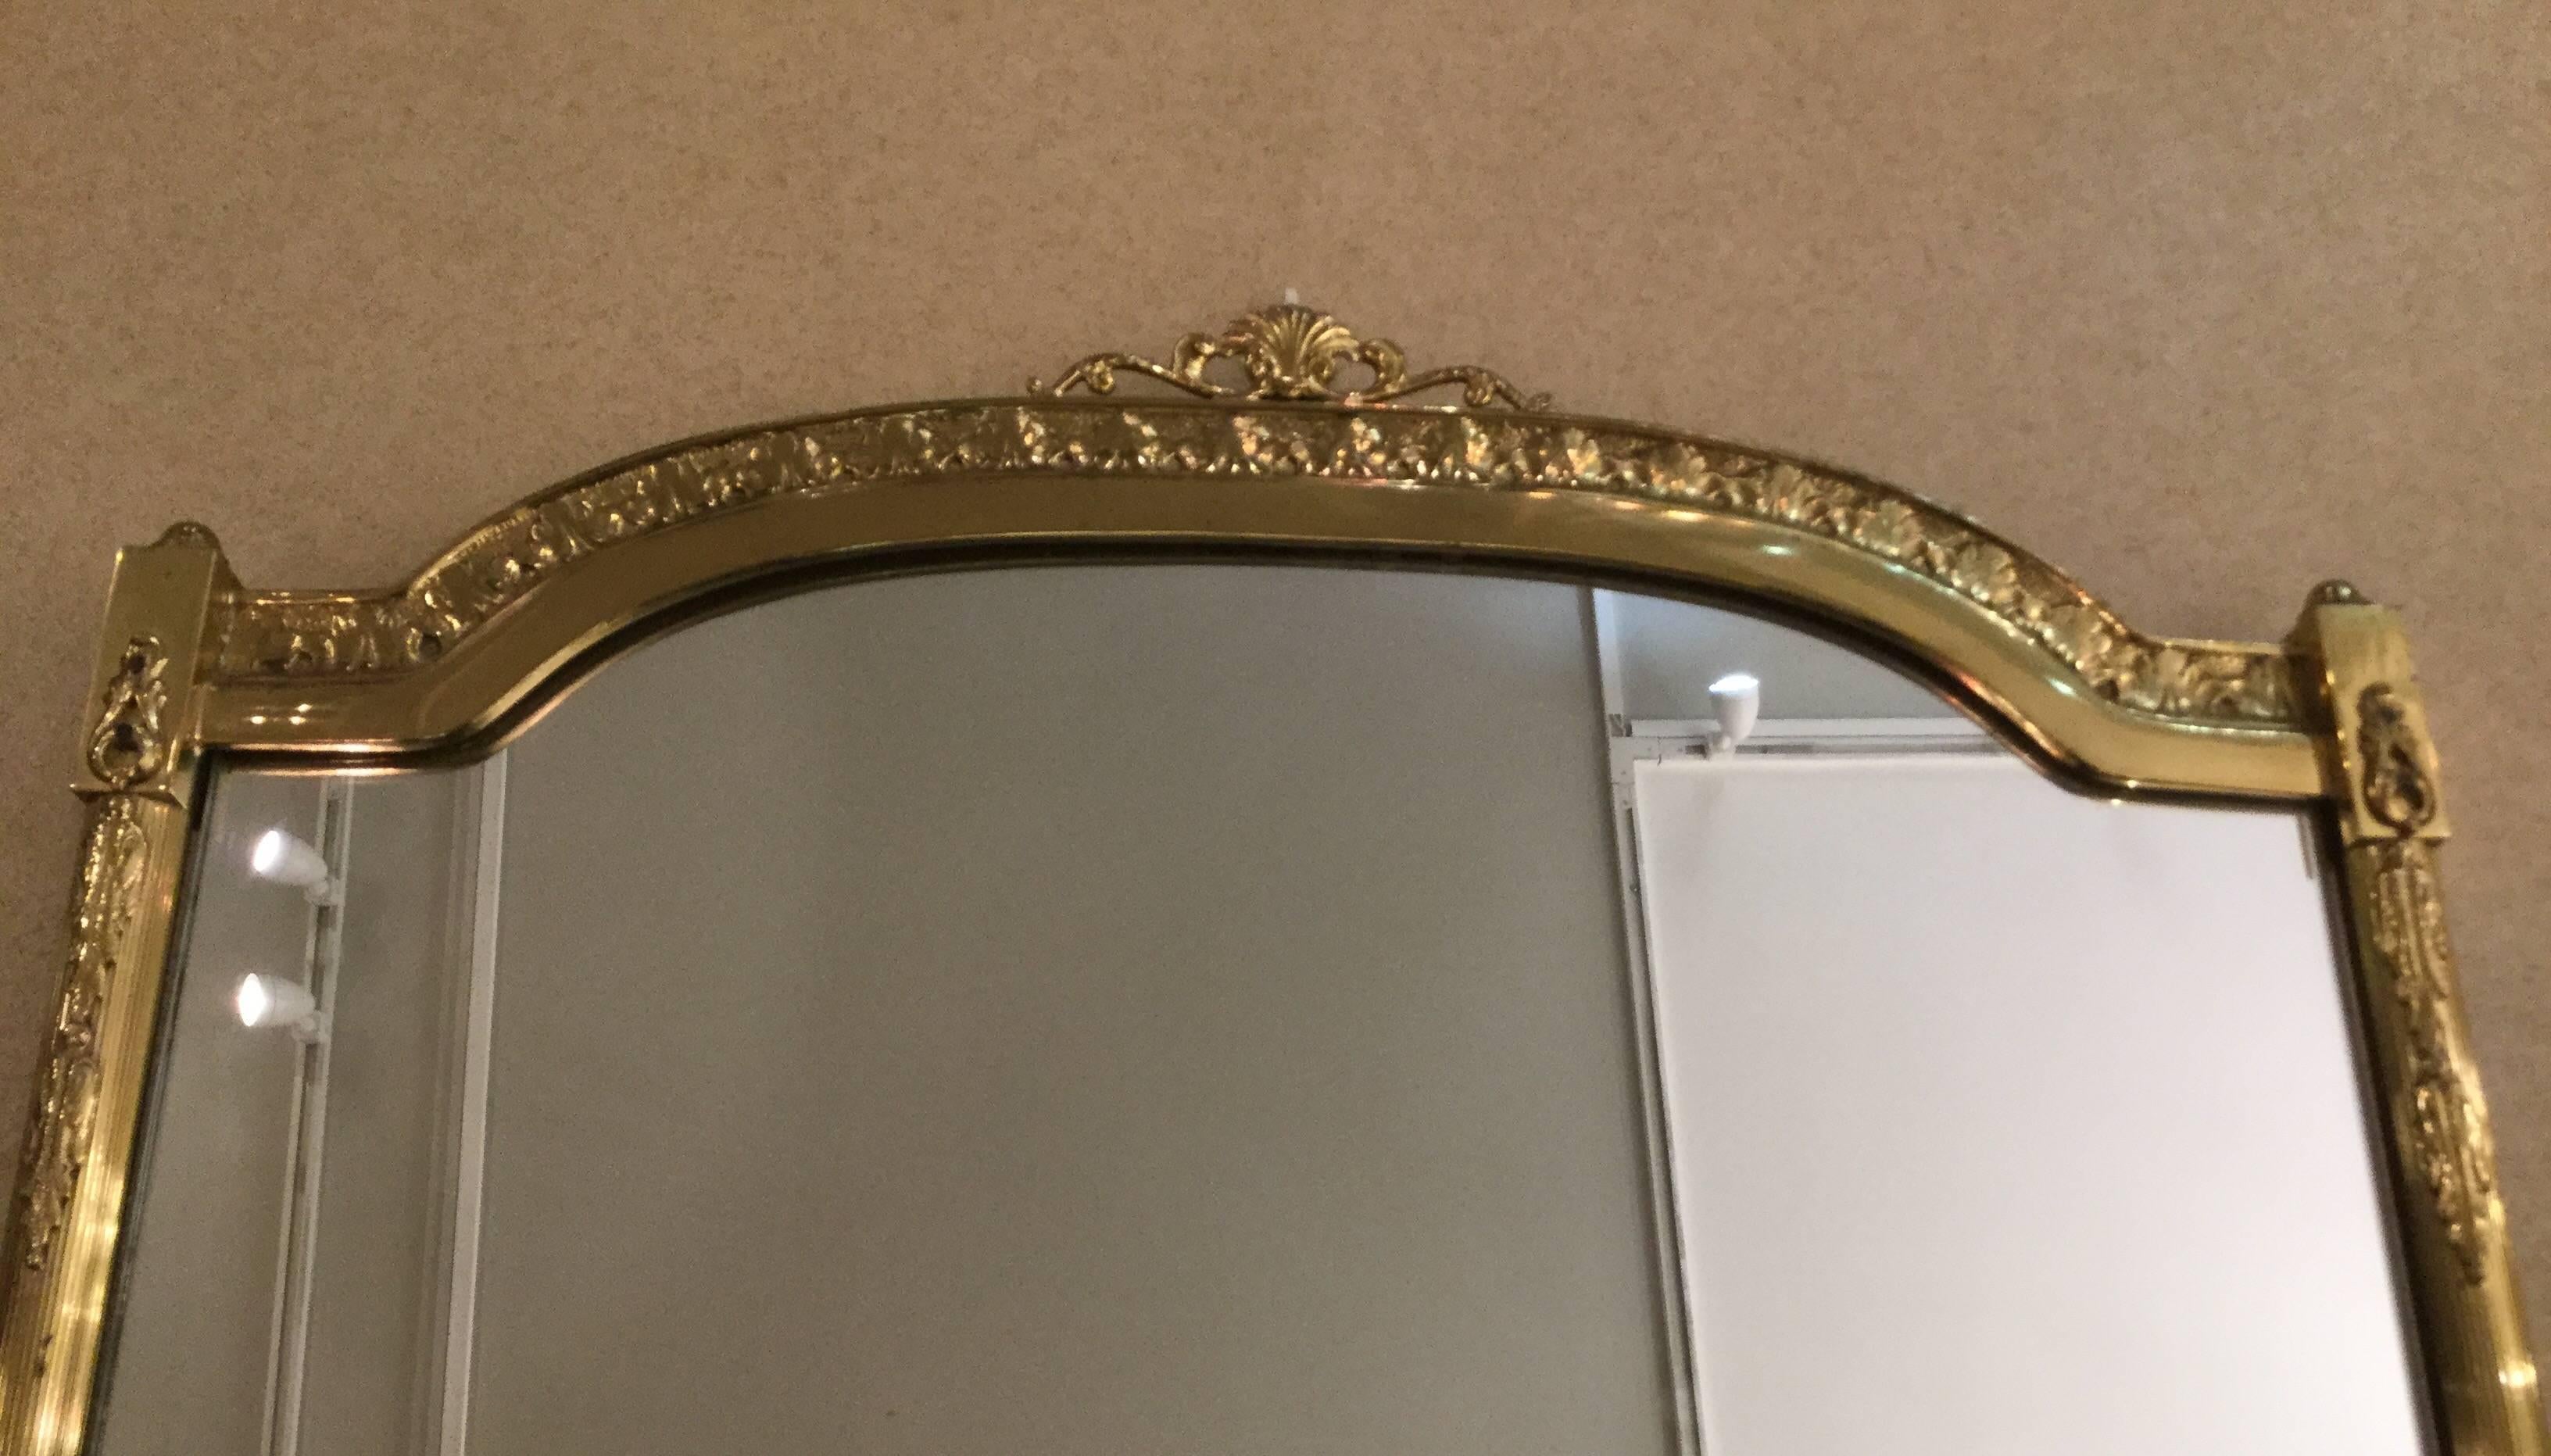 Highly decorative  mirror with a brass frame decorated with natural motifs.